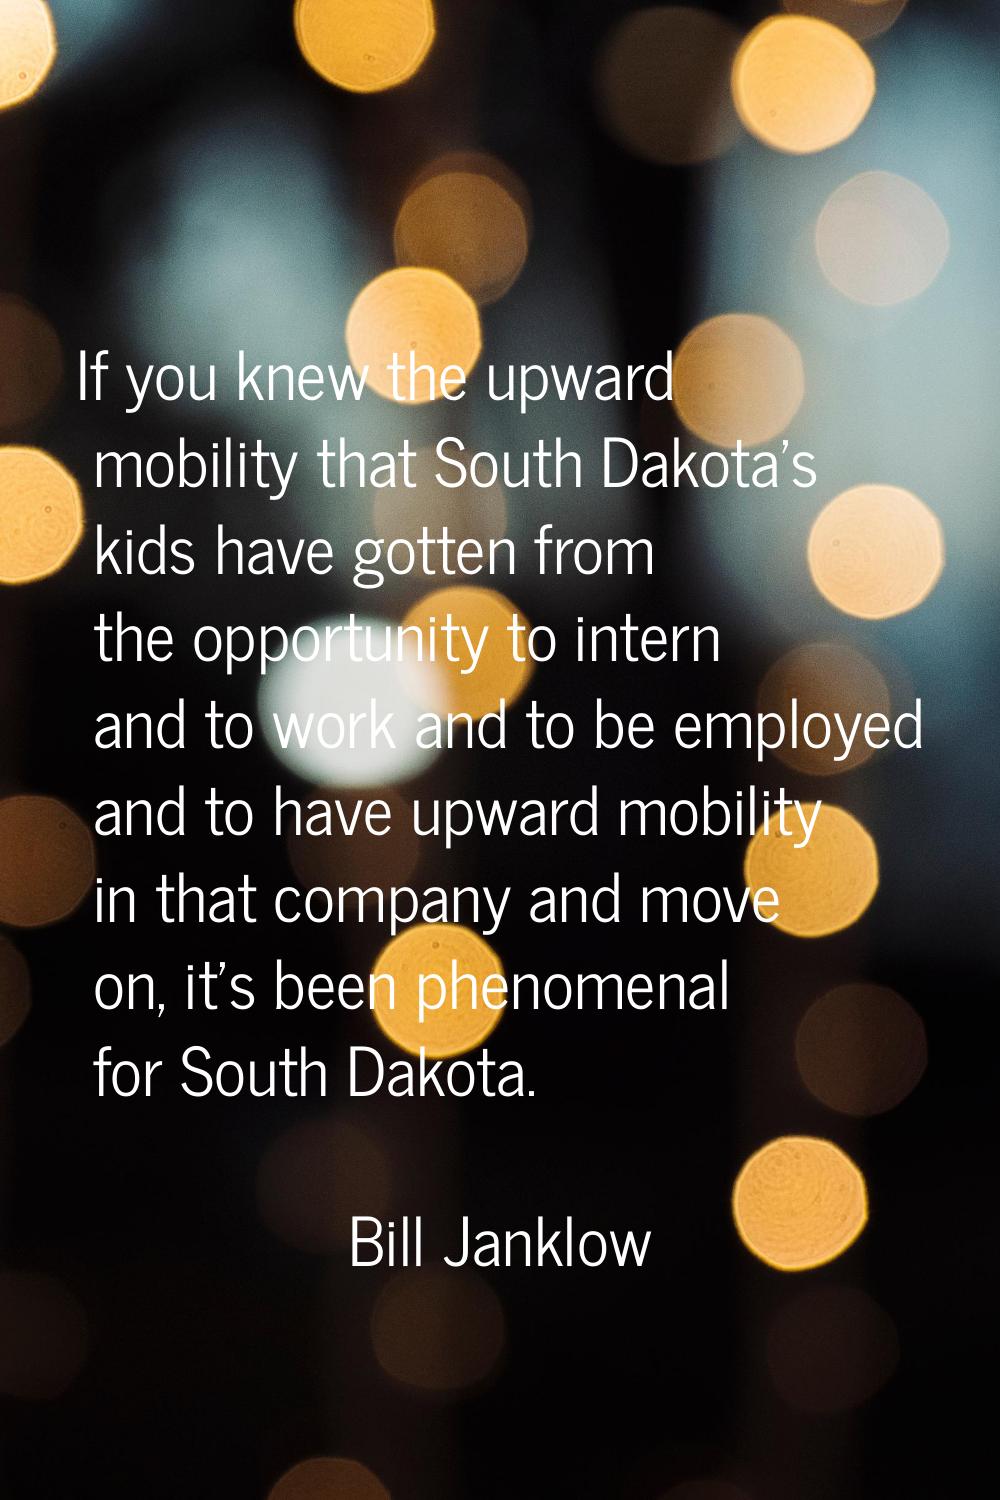 If you knew the upward mobility that South Dakota's kids have gotten from the opportunity to intern